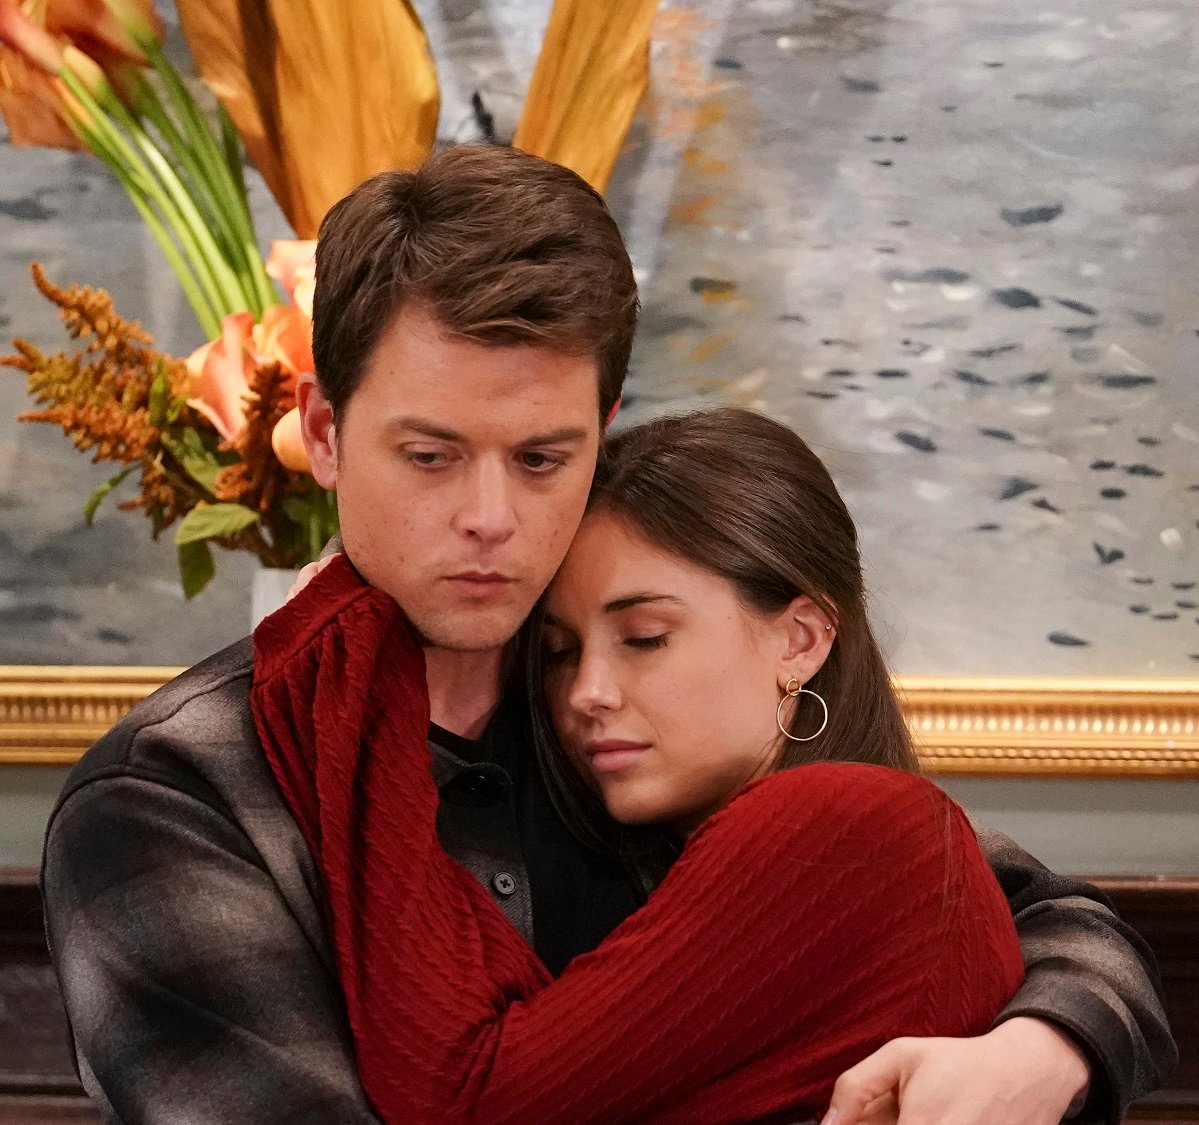 'General Hospital' stars Chad Duell and Katelyn MacMullen hugging during a scene.